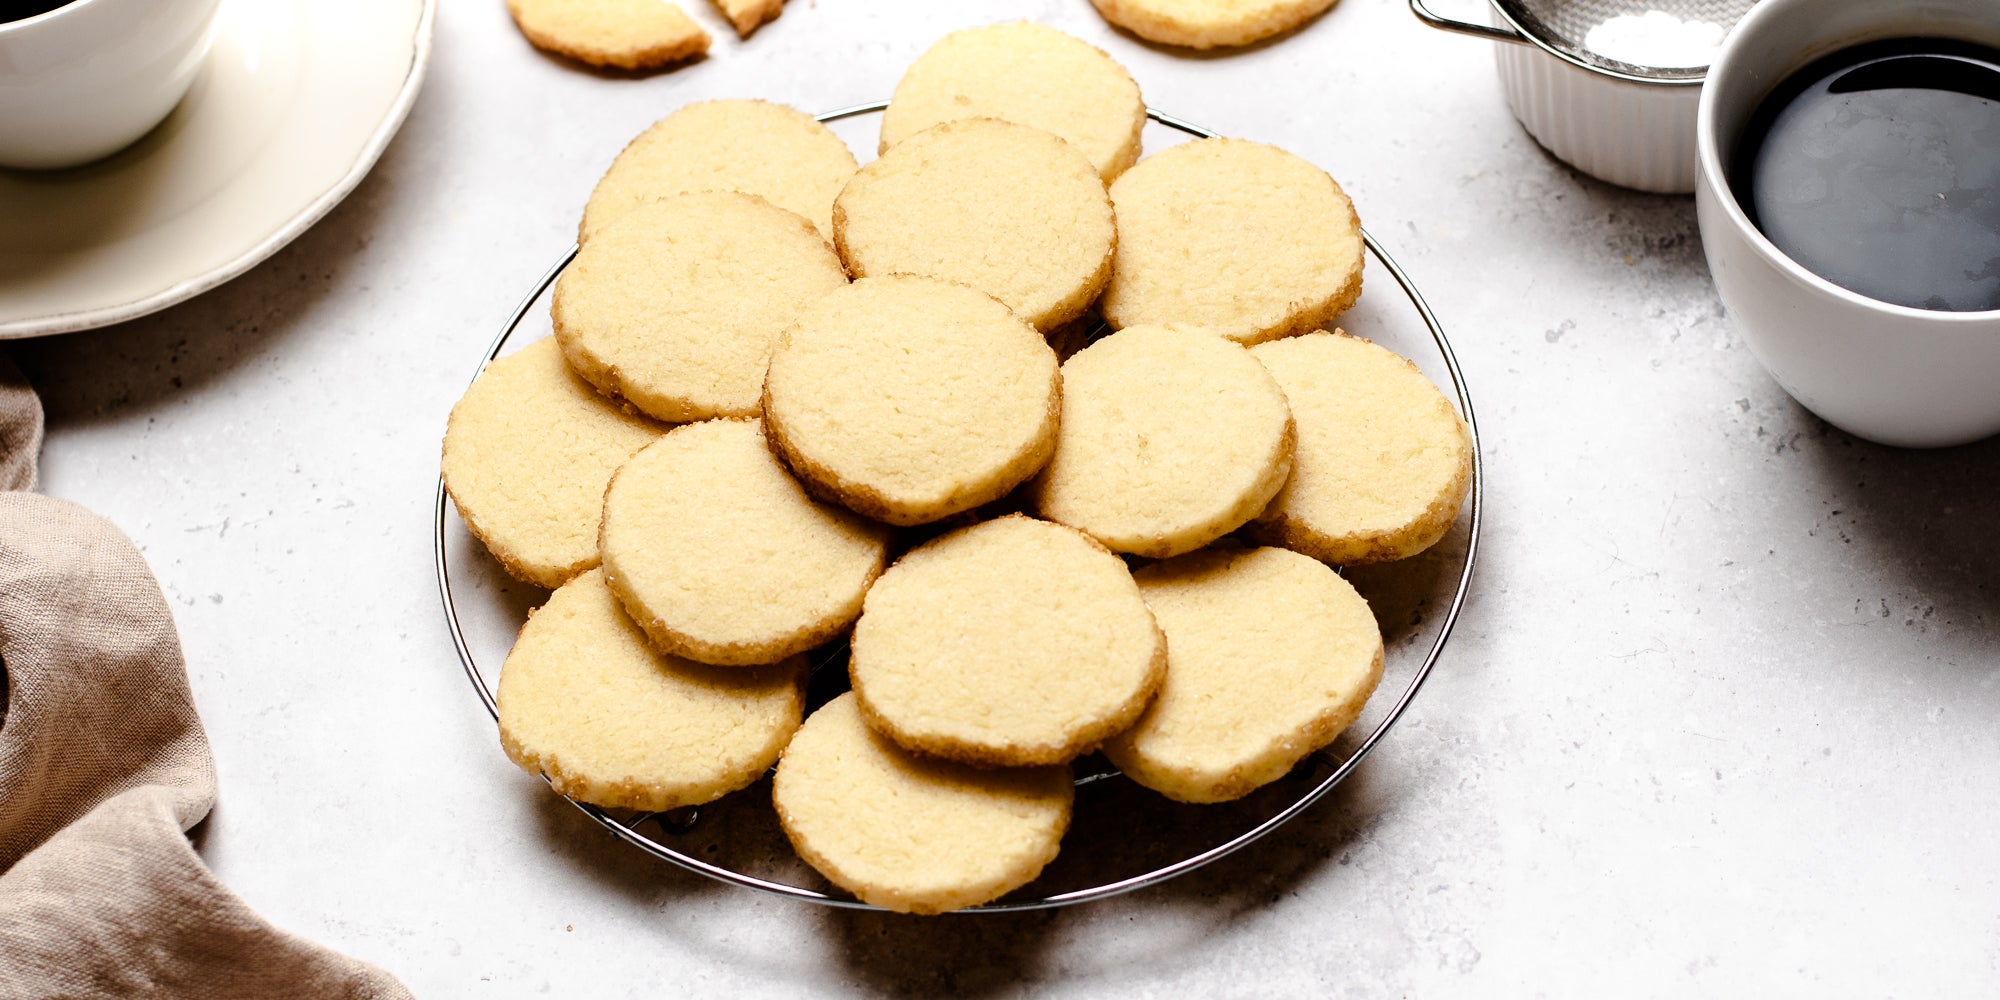 Close-up of a batch of fresh shortbread biscuits on a plate, next to cups filled with coffee